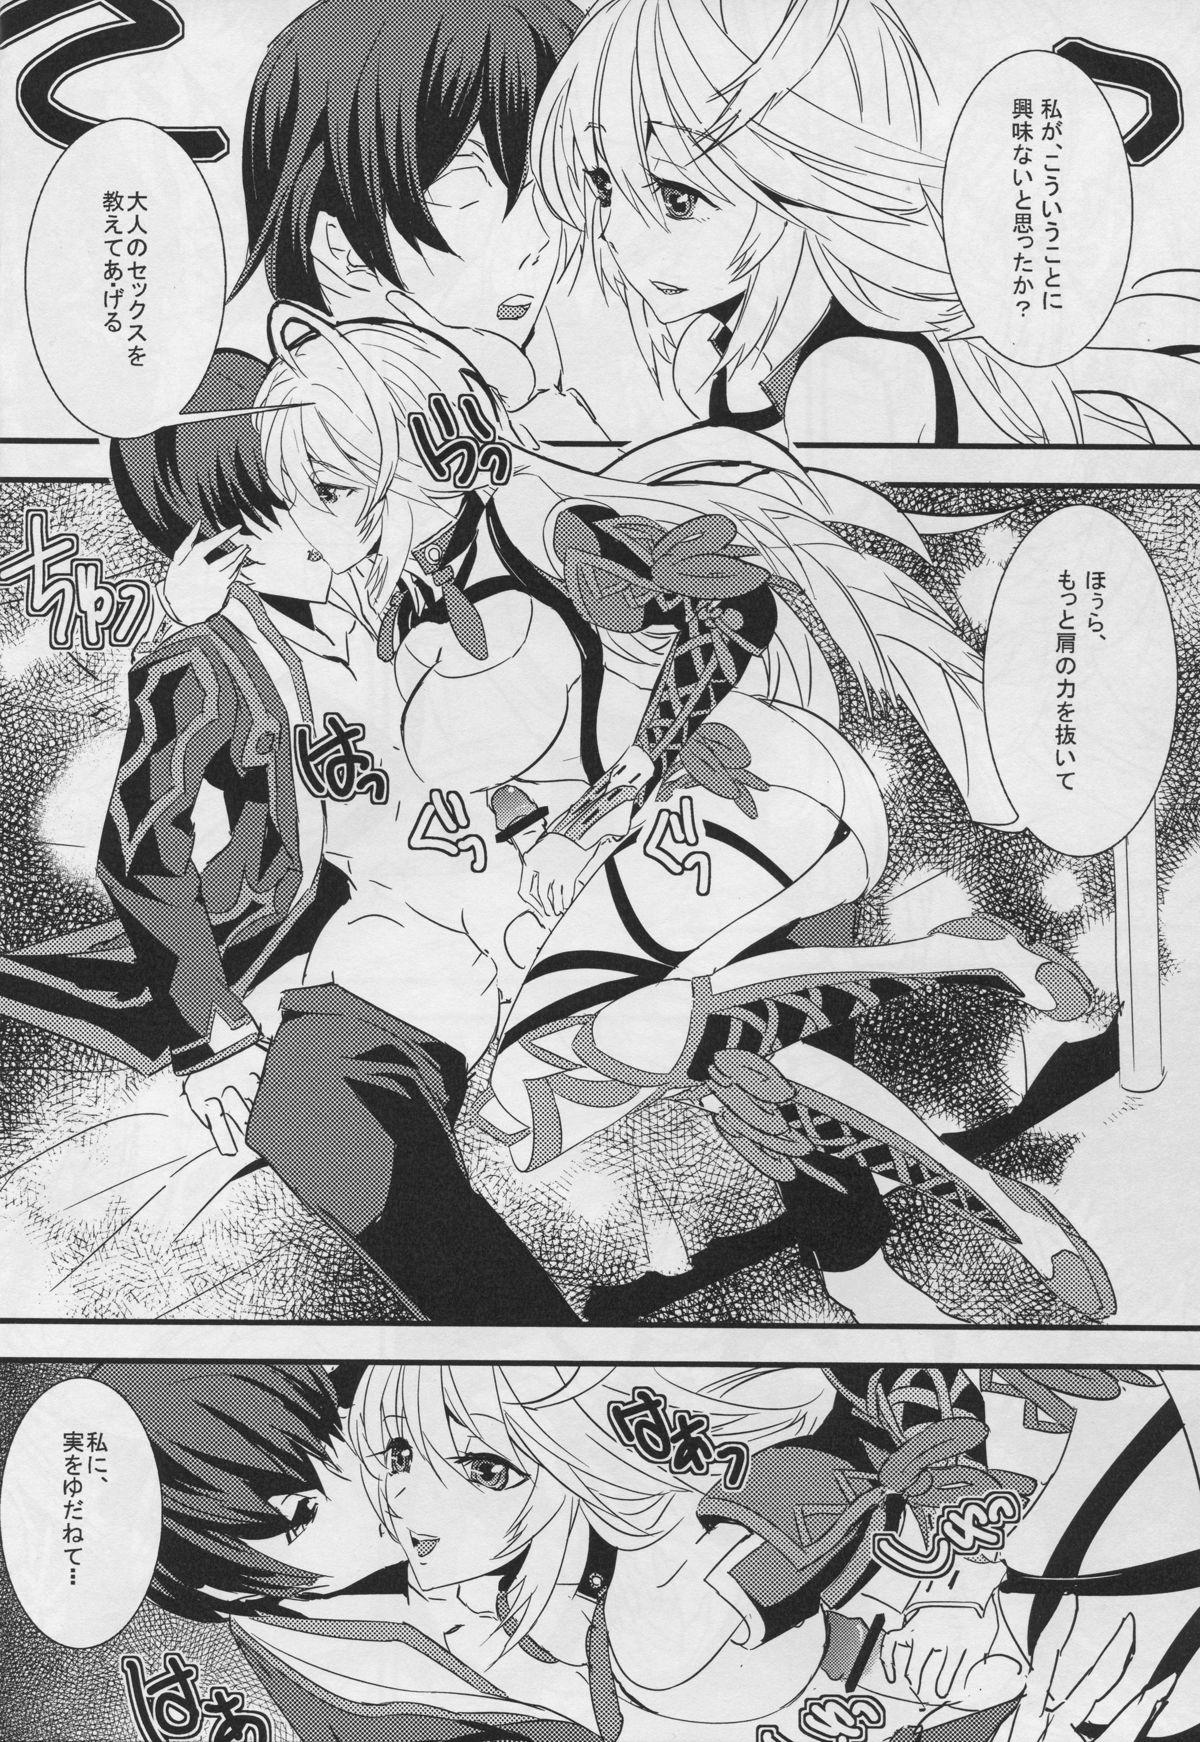 Tribbing Miracle - Tales of xillia Sesso - Page 10